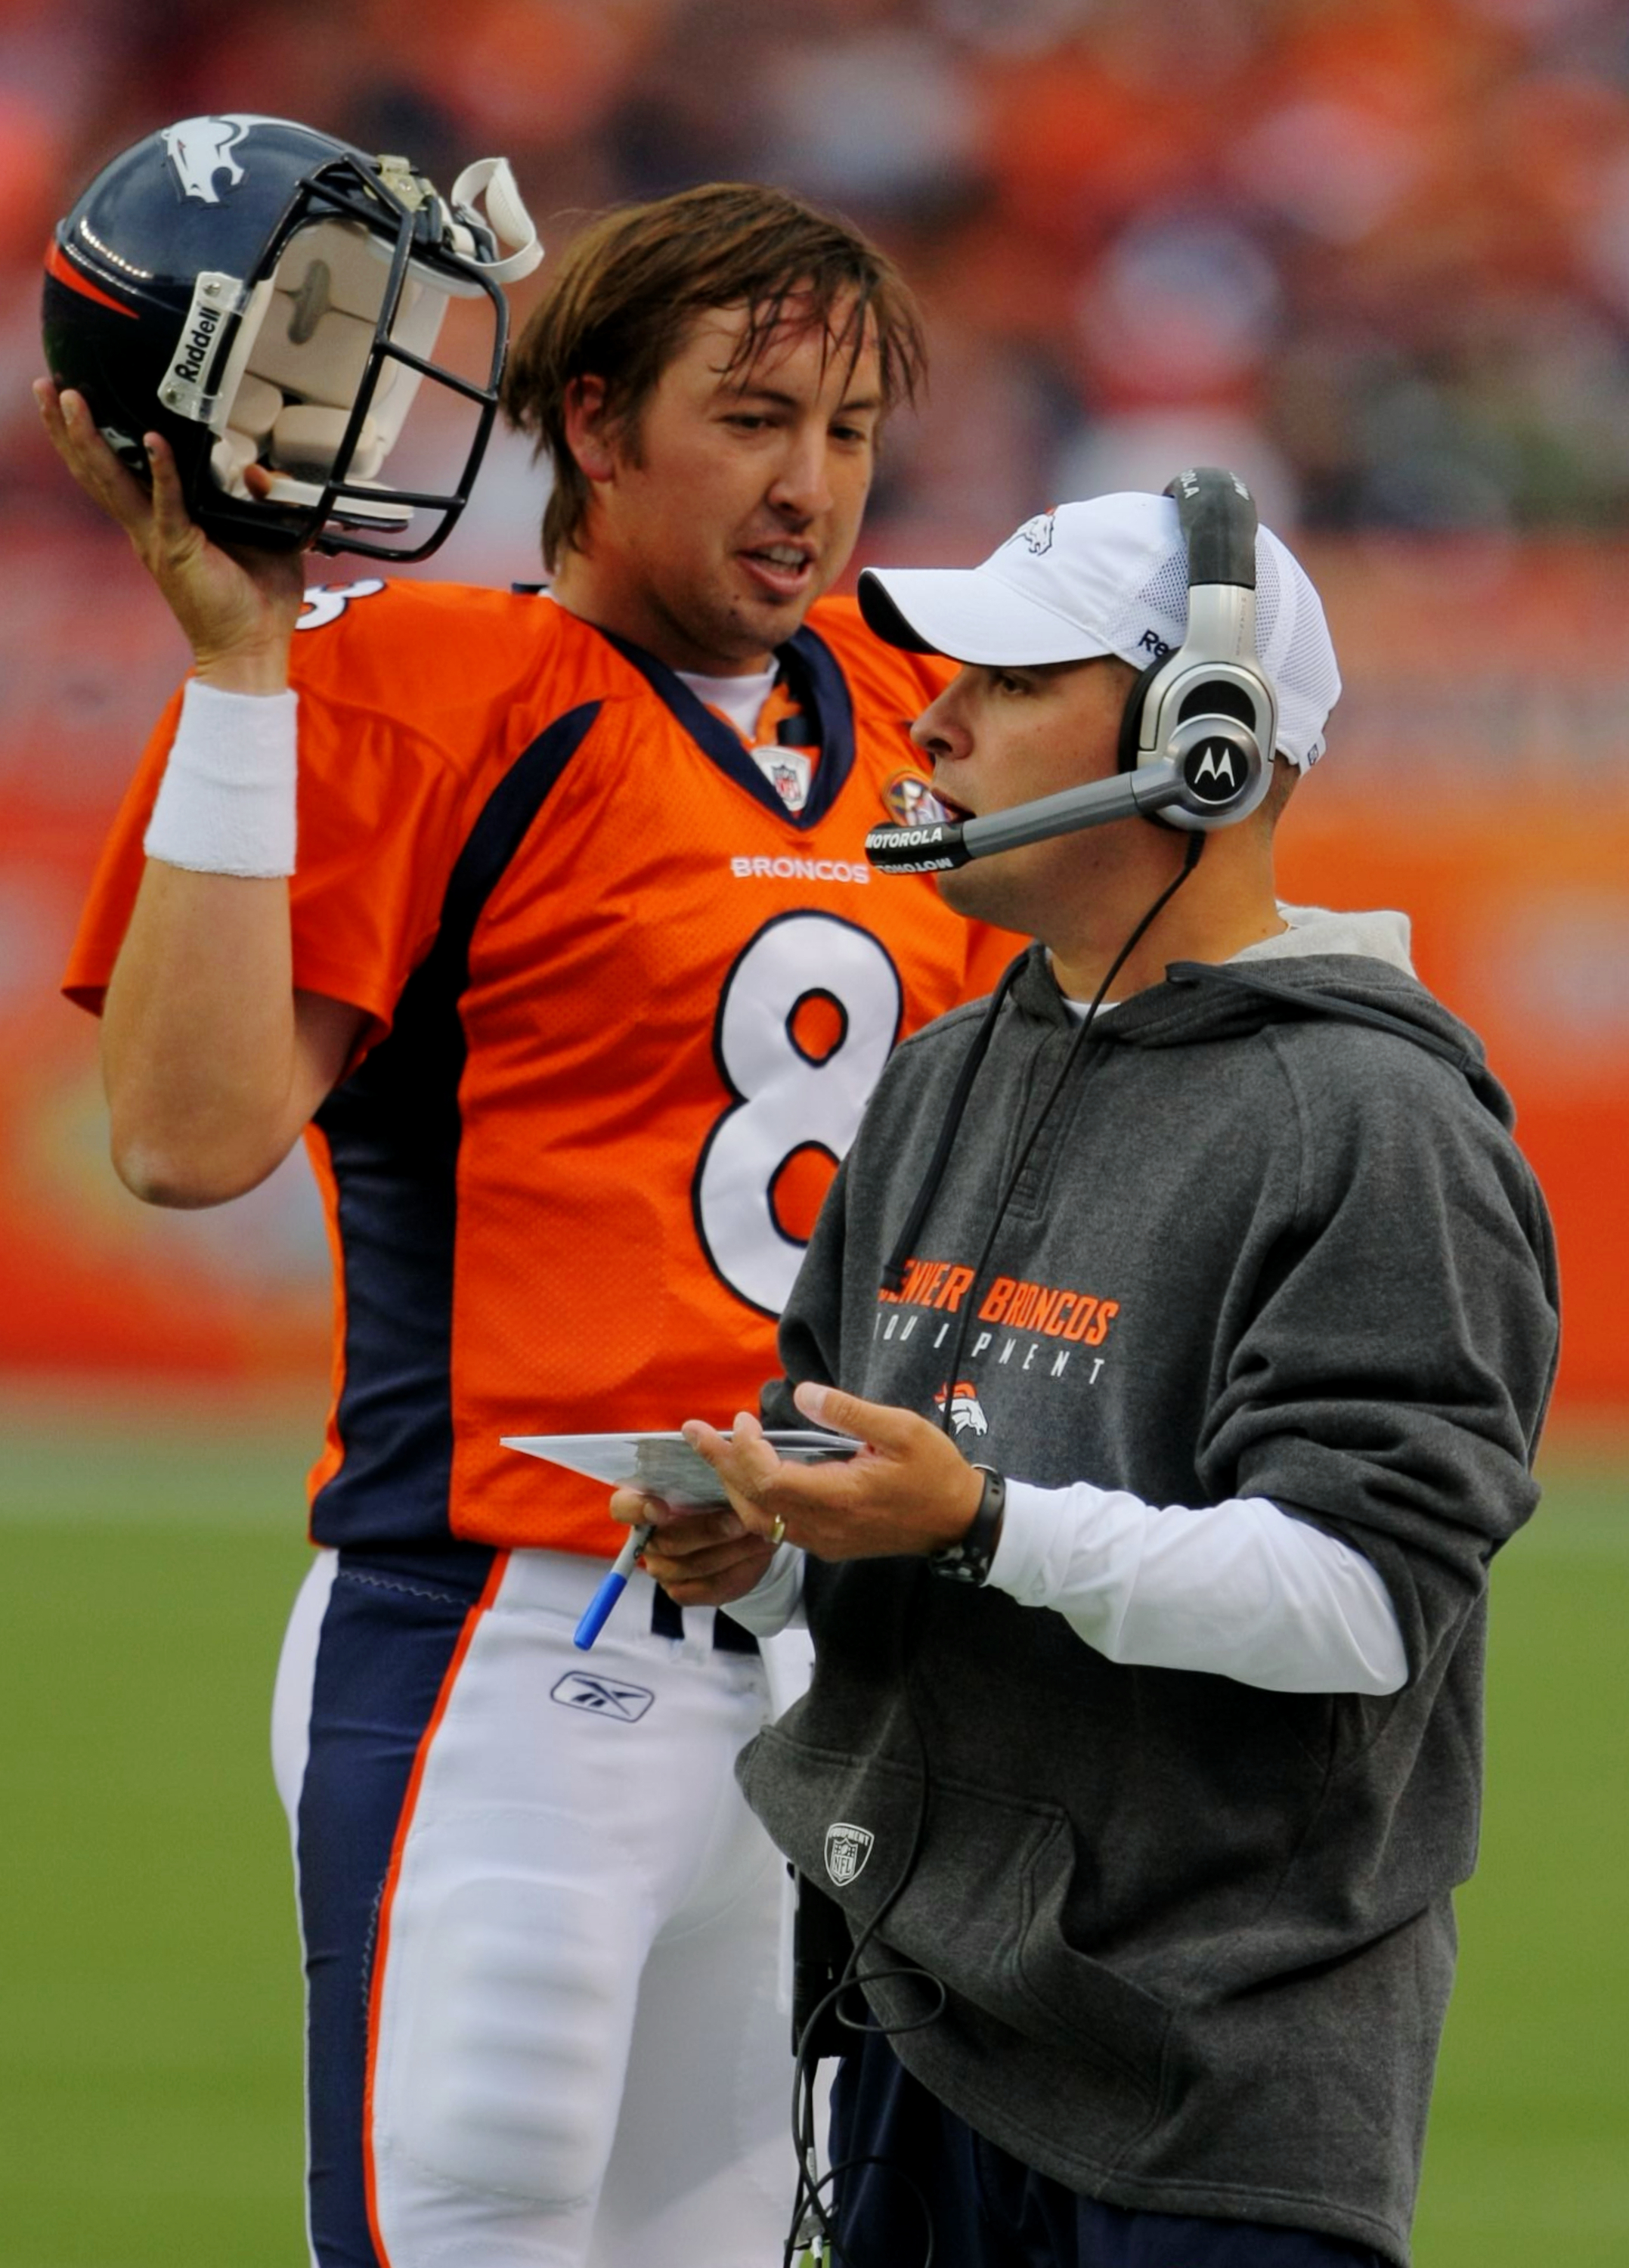 DENVER - AUGUST 30:  Head Coach Josh McDaniels (L) of the Denver Broncos talks to his quarterback Kyle Orton #8 (R) during the preseason game against the Chicago Bears at INVESCO Field at Mile High on August 30, 2009 in Denver, Colorado.  (Photo by Doug P